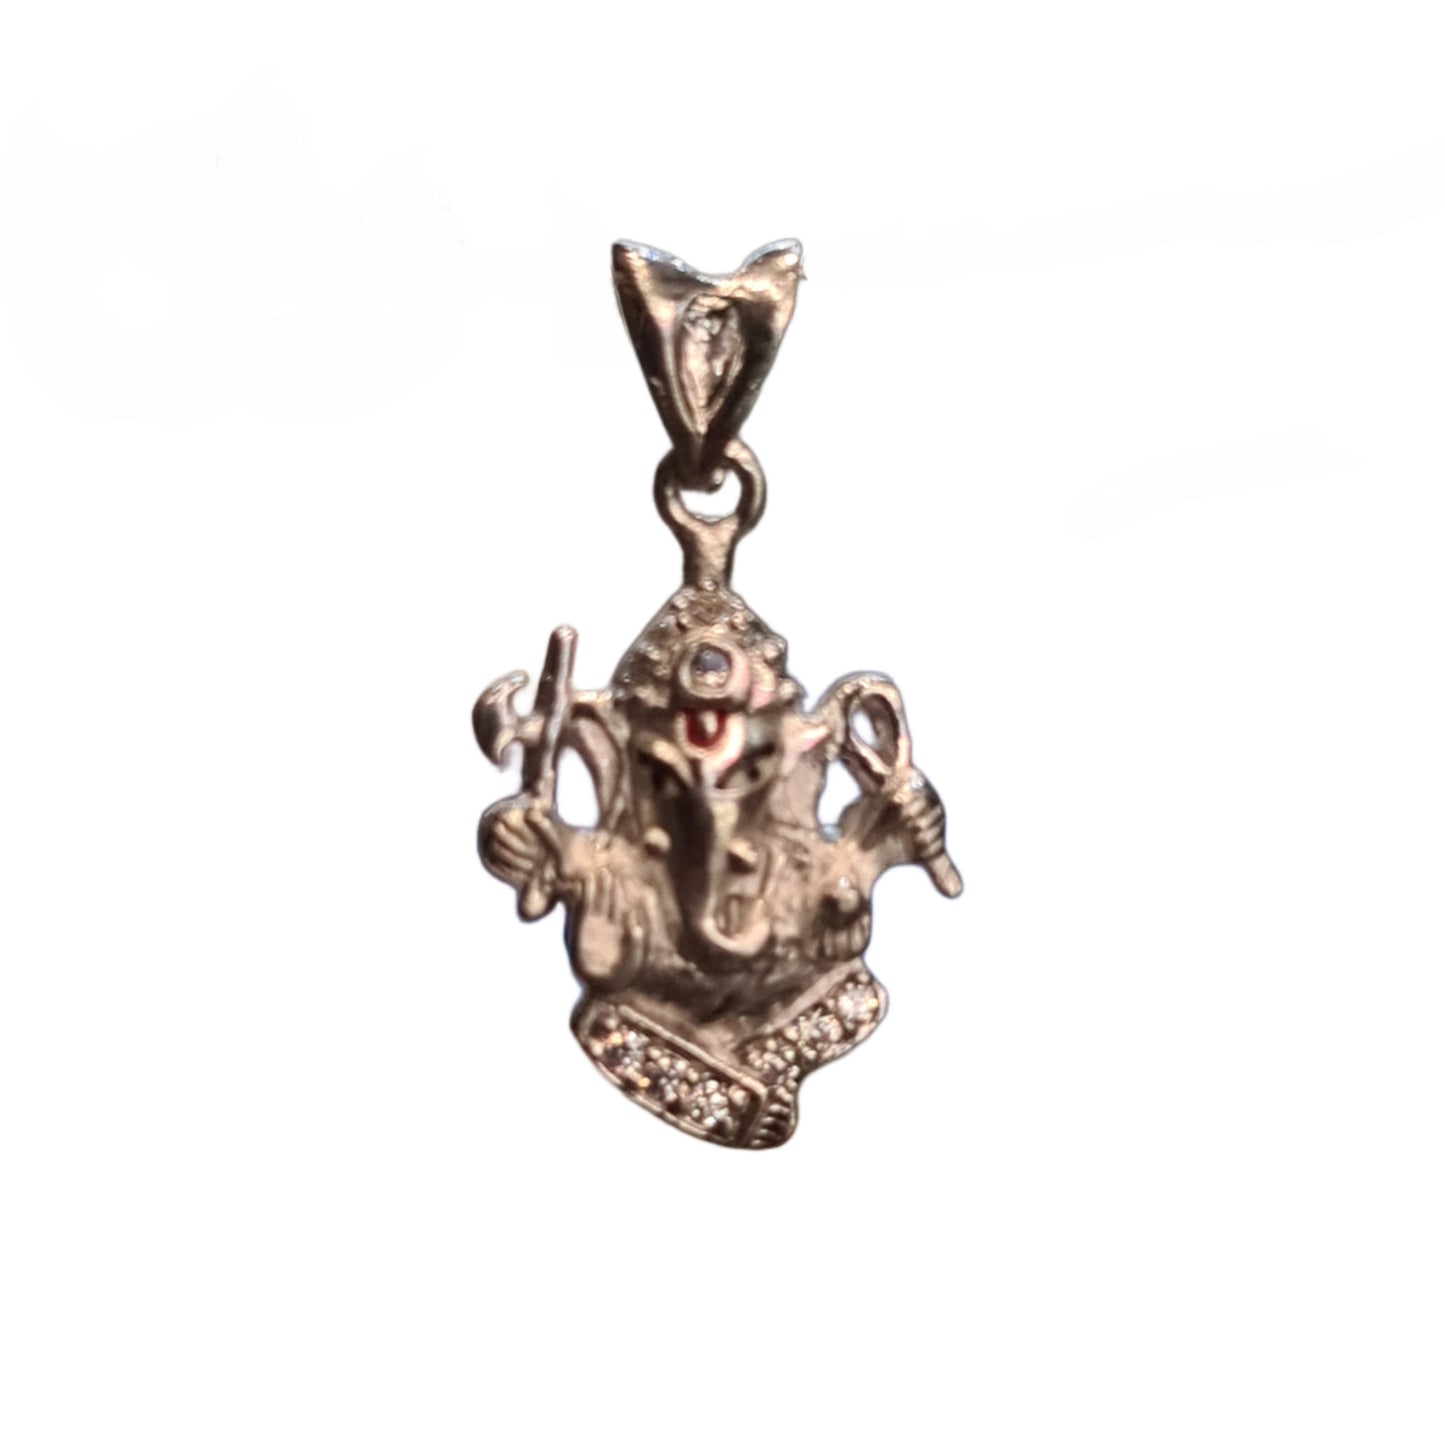 "Shine Bright with Silver: Exquisite 92.5 Ganesh Pendant"